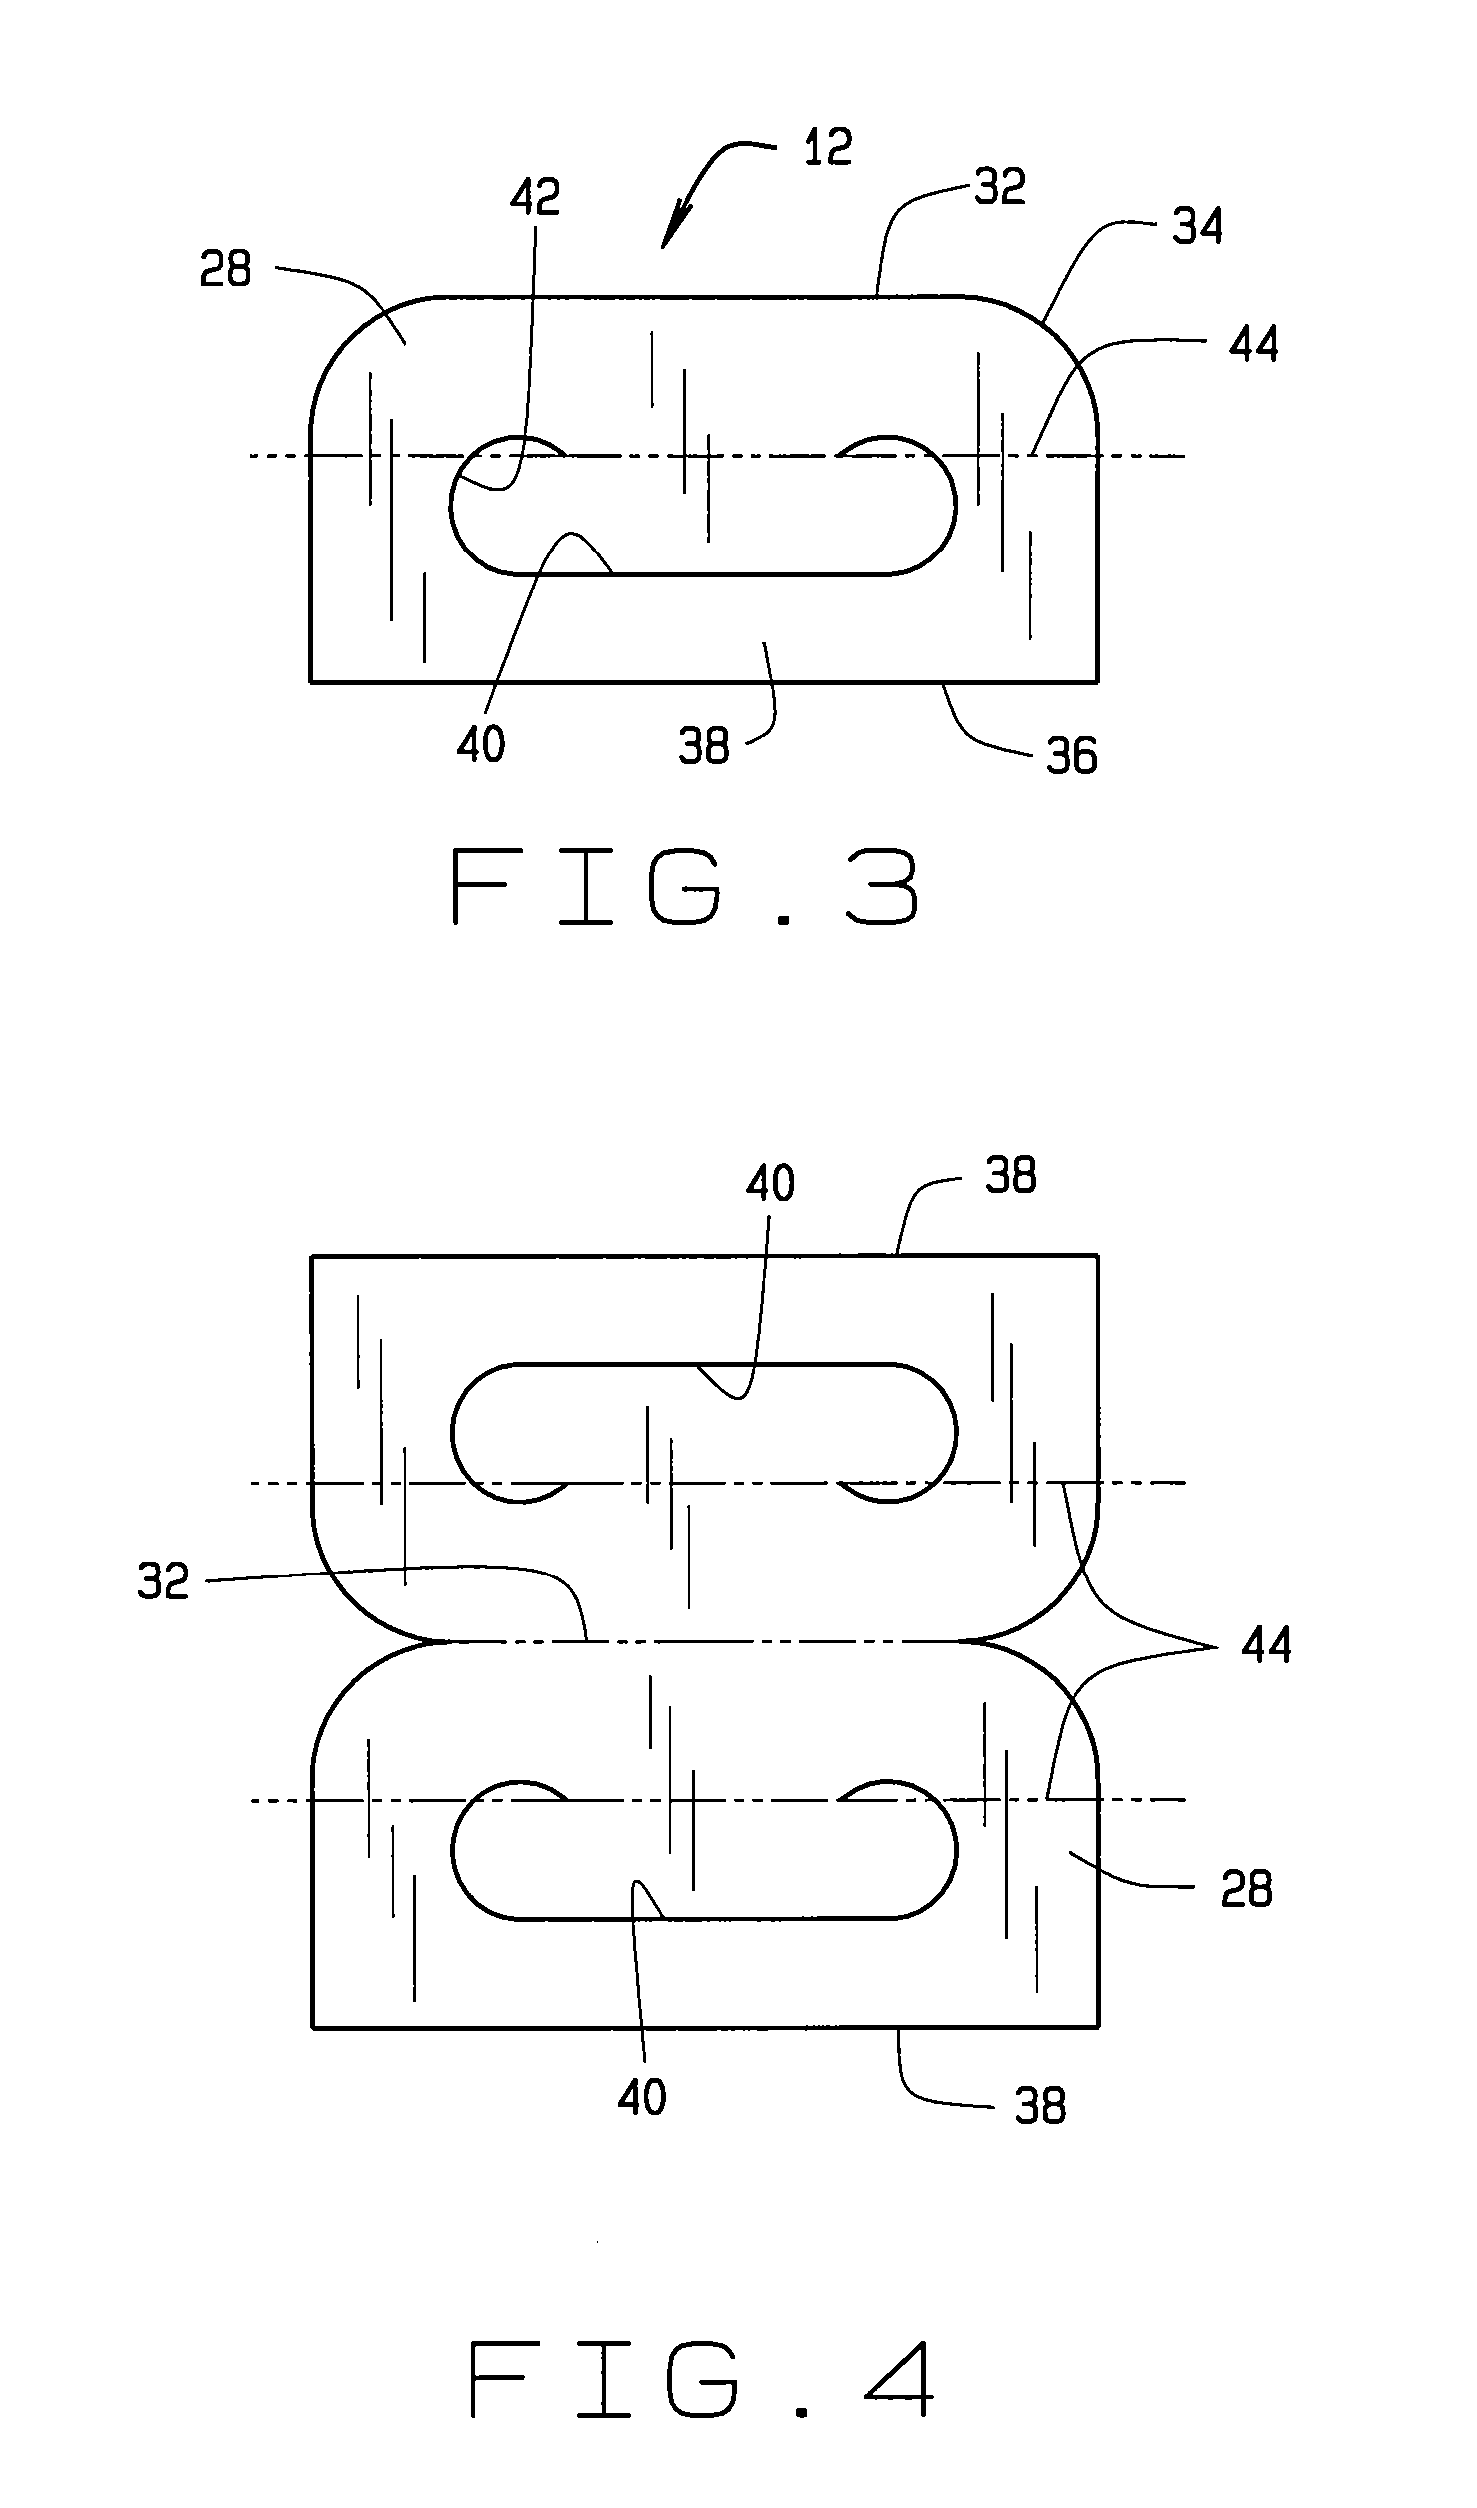 Handle assembly for packages and method of making same